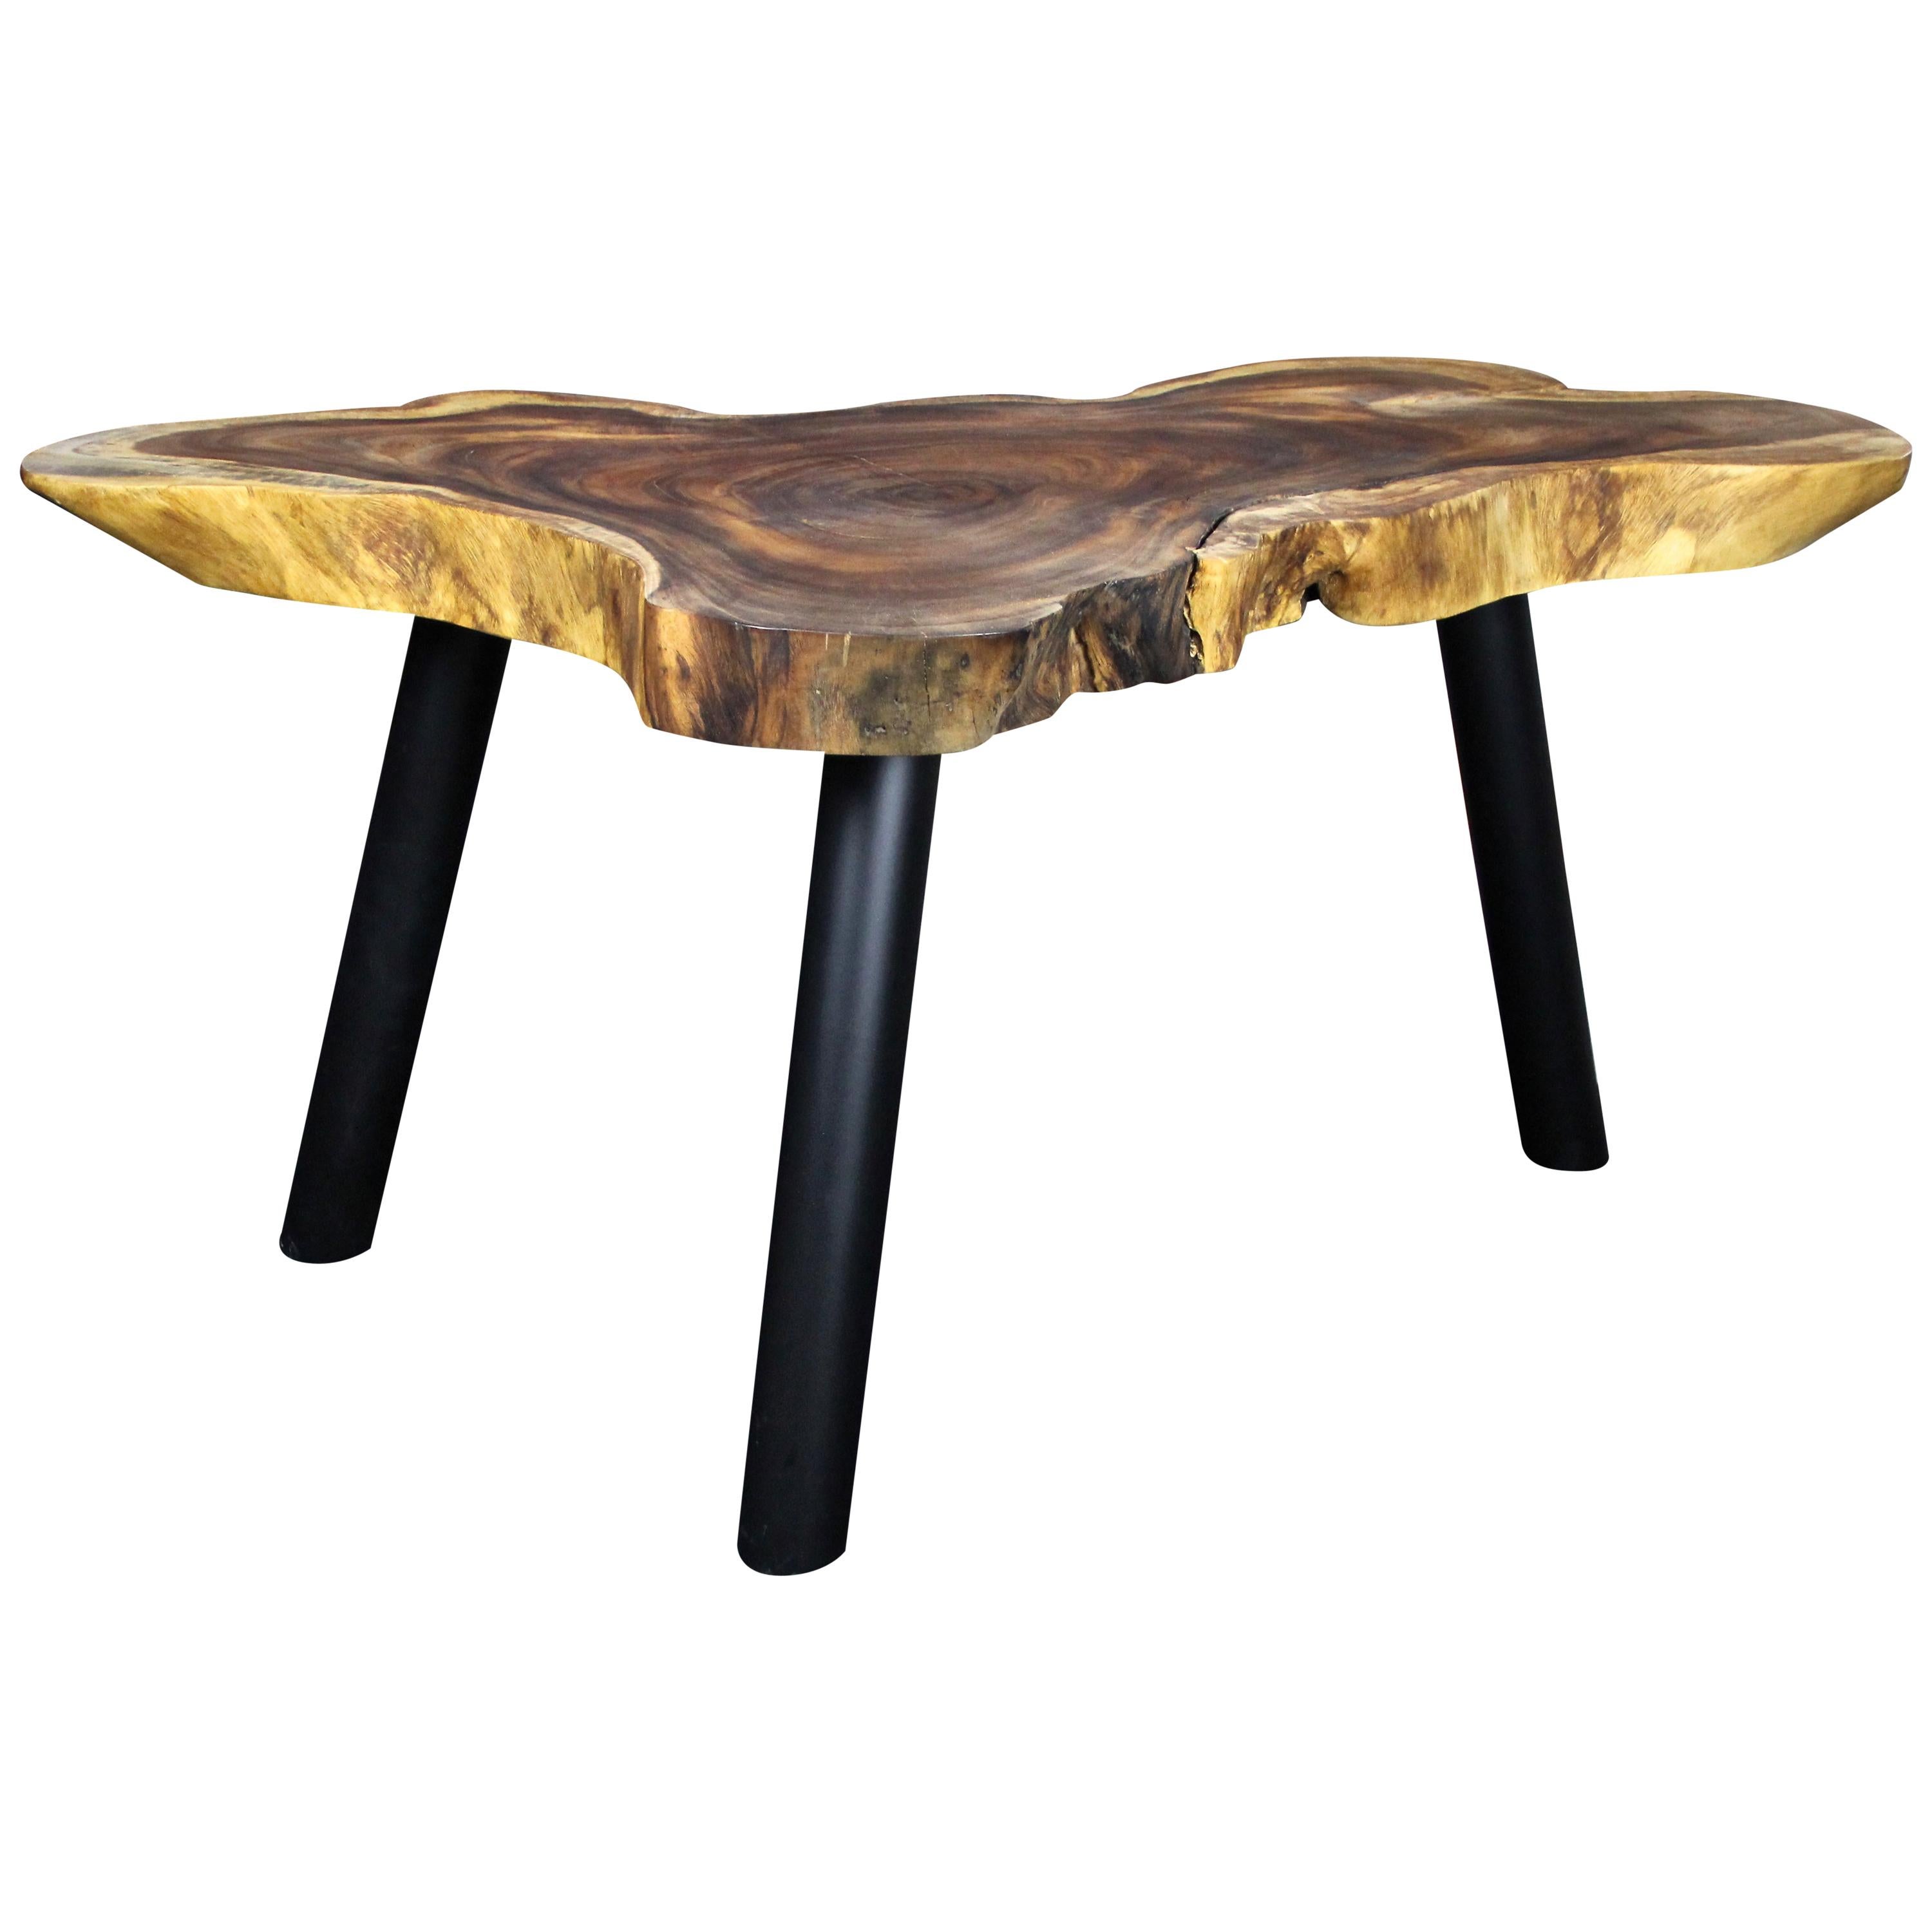 Organic Modern Suar Wood Dining Table or Side Table, 2020